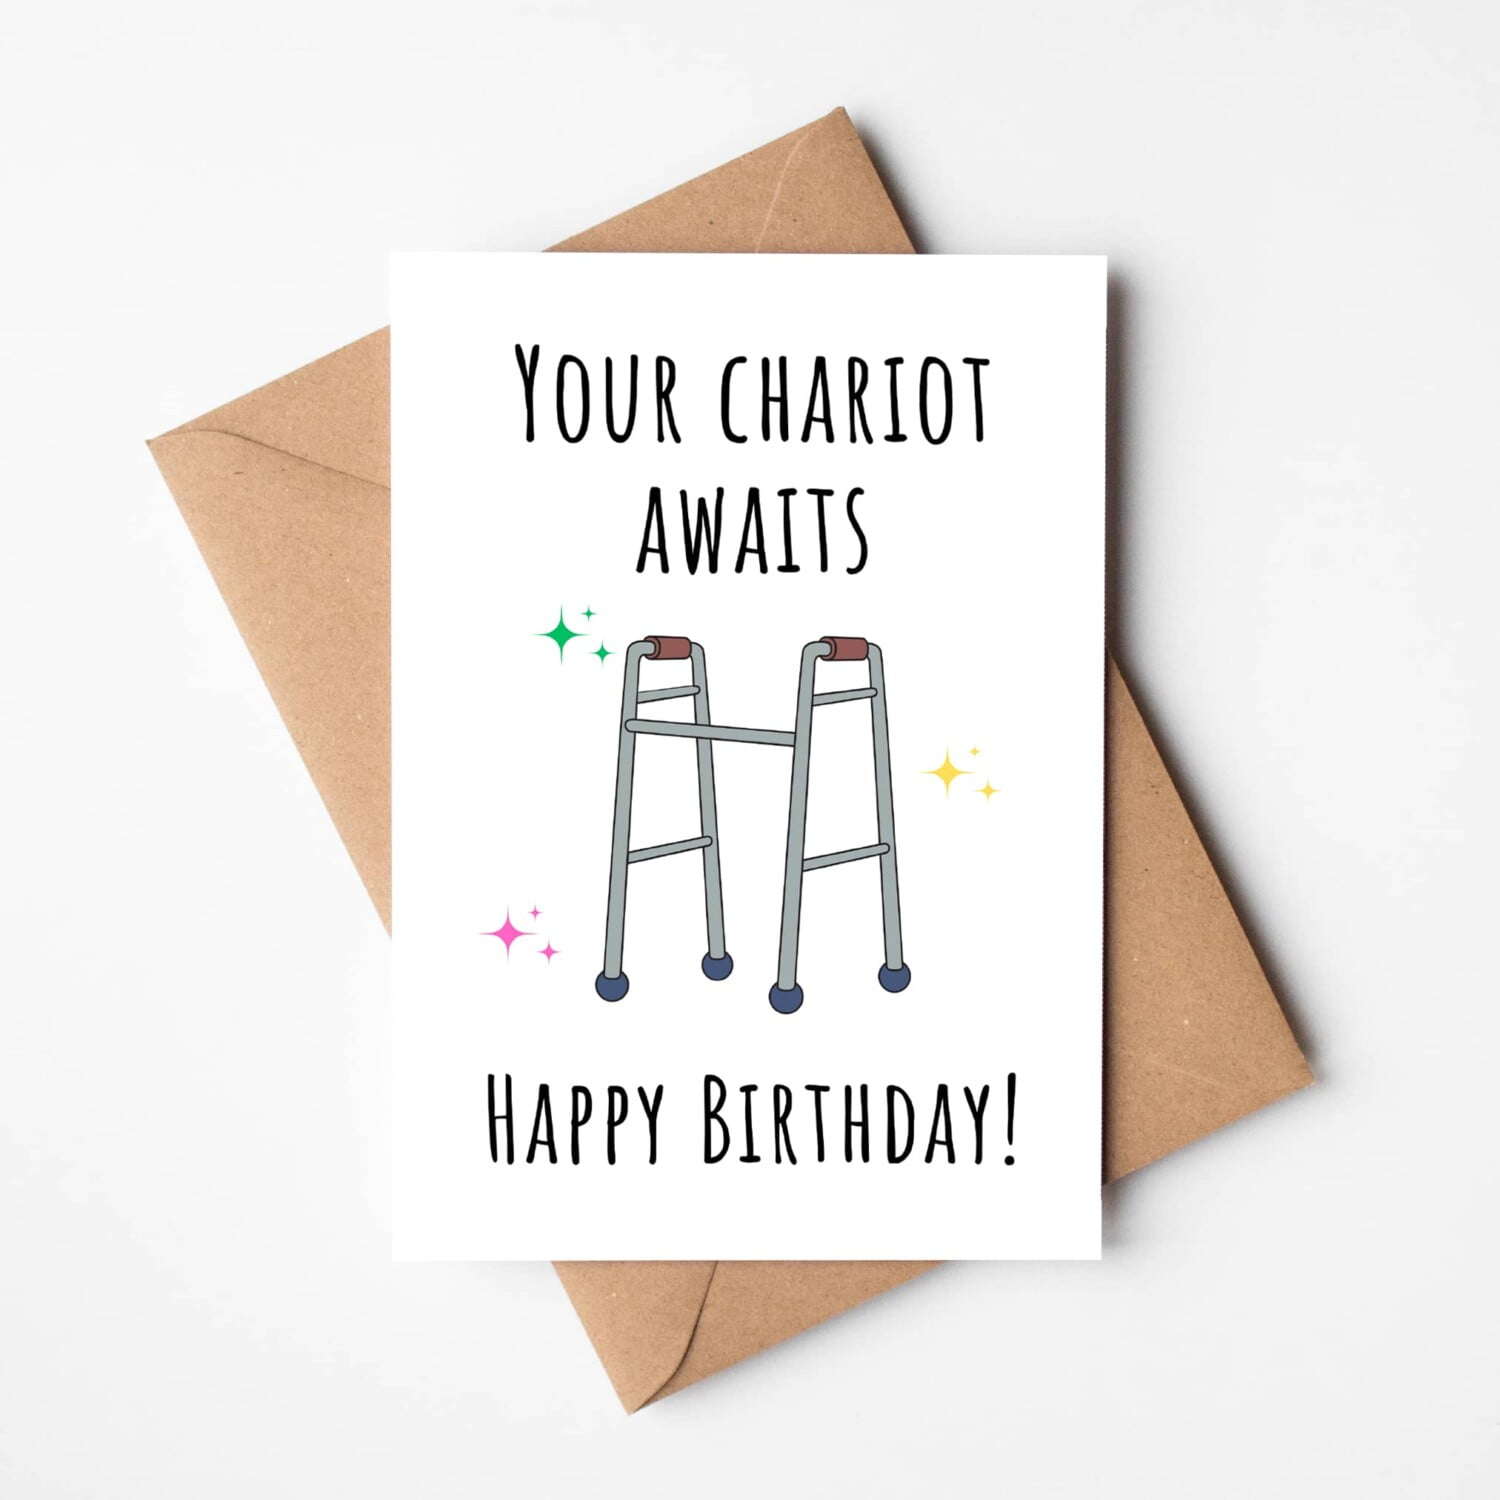 Your Chariot Awaits birthday card, Printing in County Monaghan, Ireland by Design Gaff